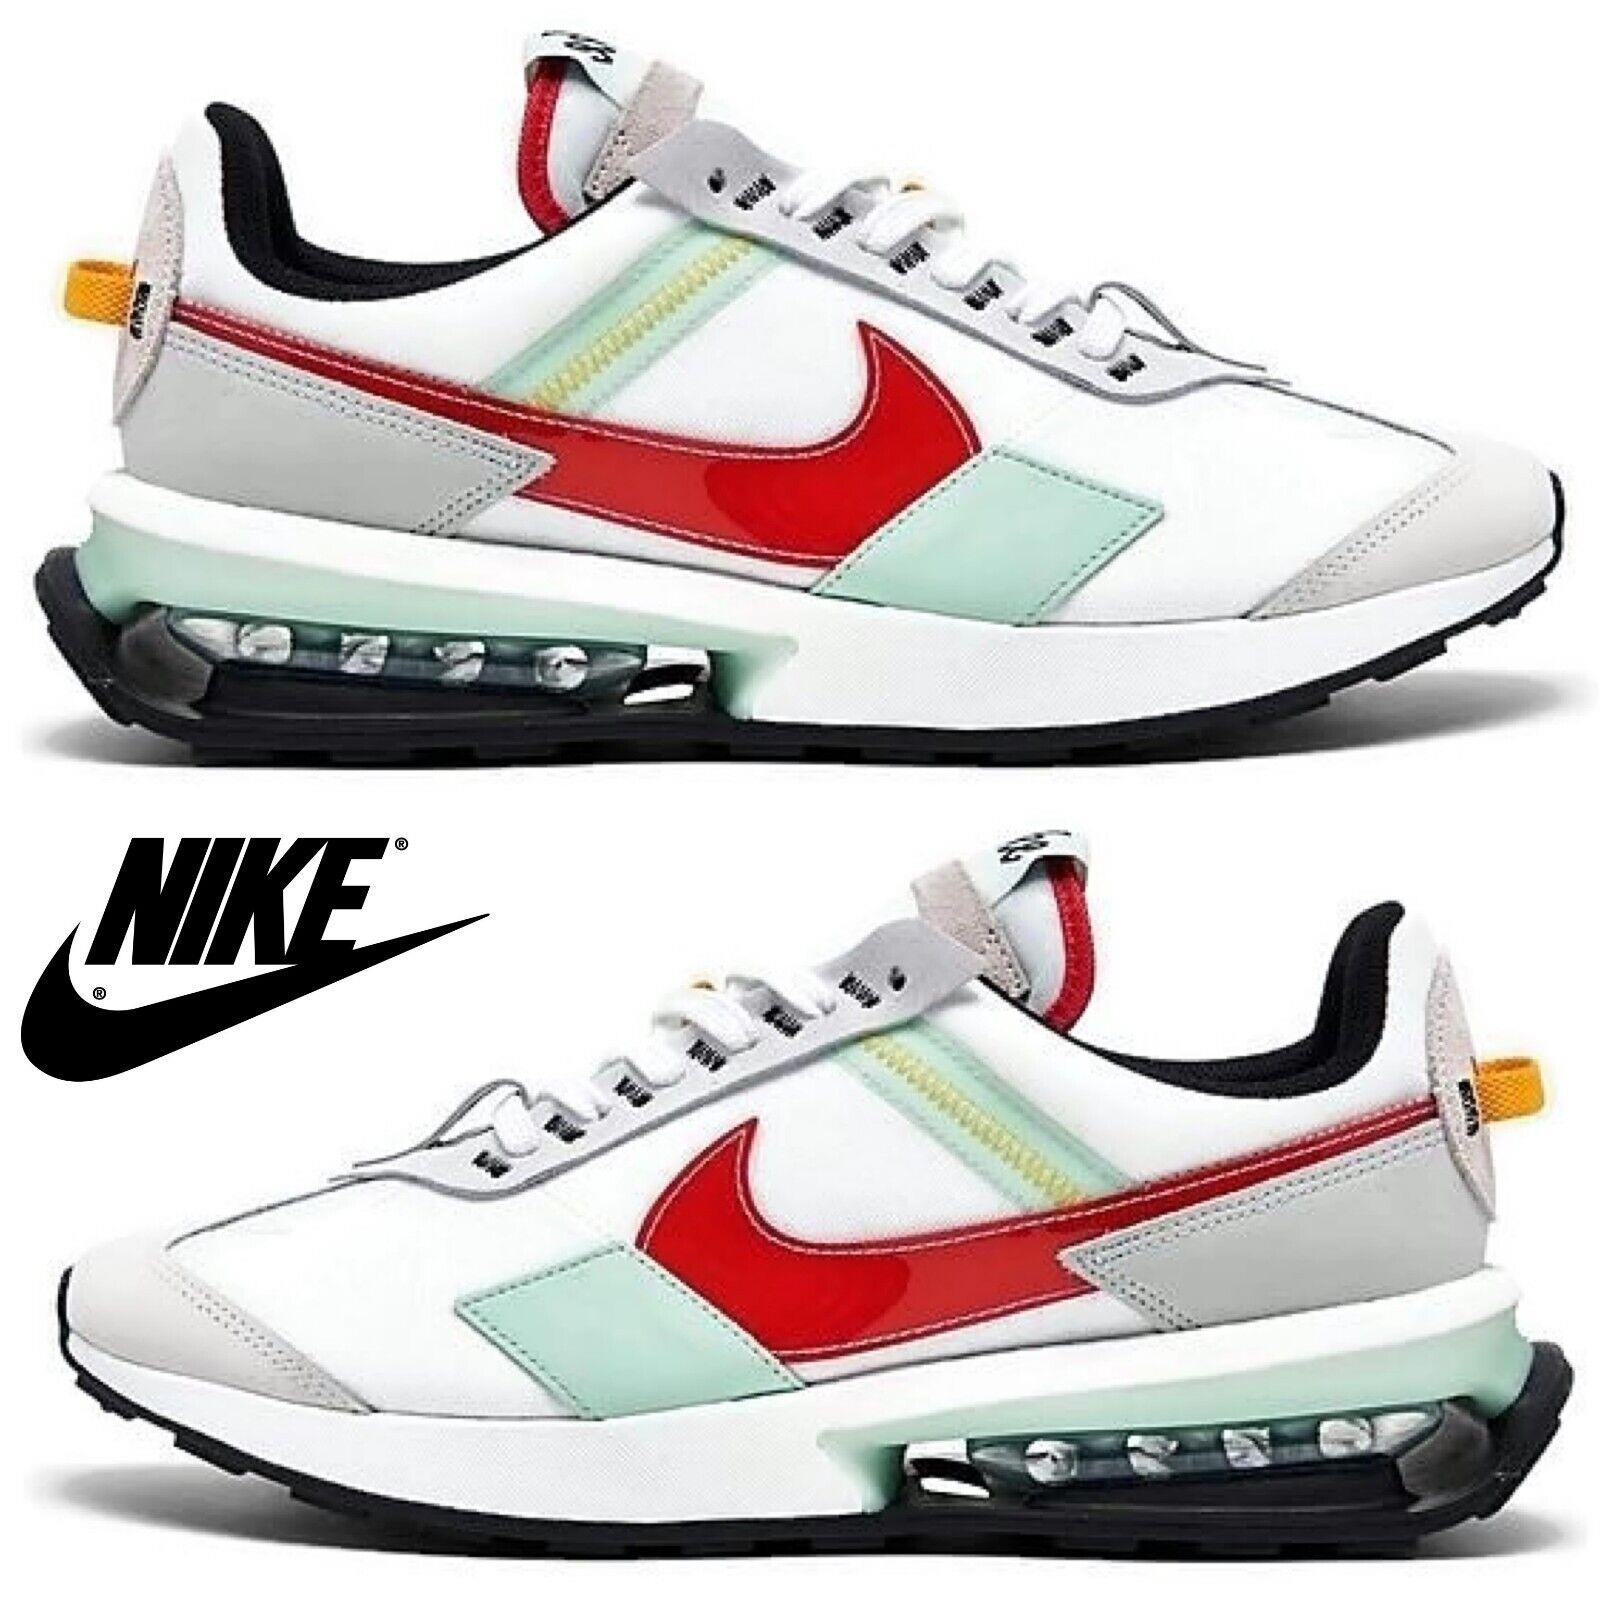 Nike Air Max Pre-day Men`s Sneakers Comfort Casual Sport Shoes Smoke White